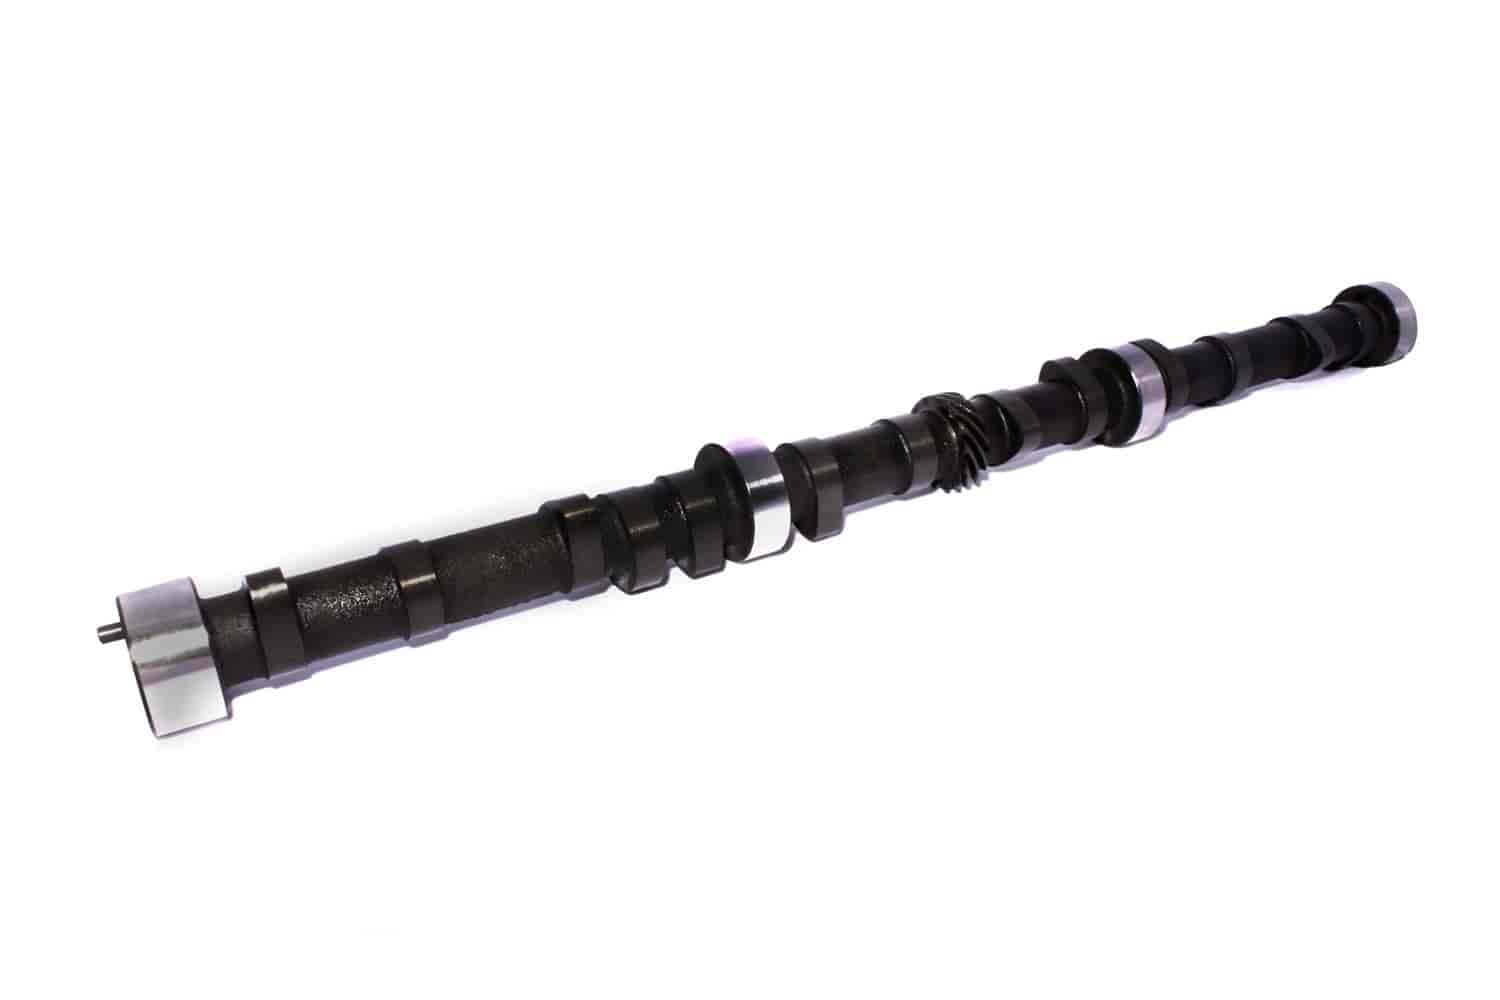 Comp Cams  Xtreme 4x4  Hydraulic Flat Tappet Camshafts